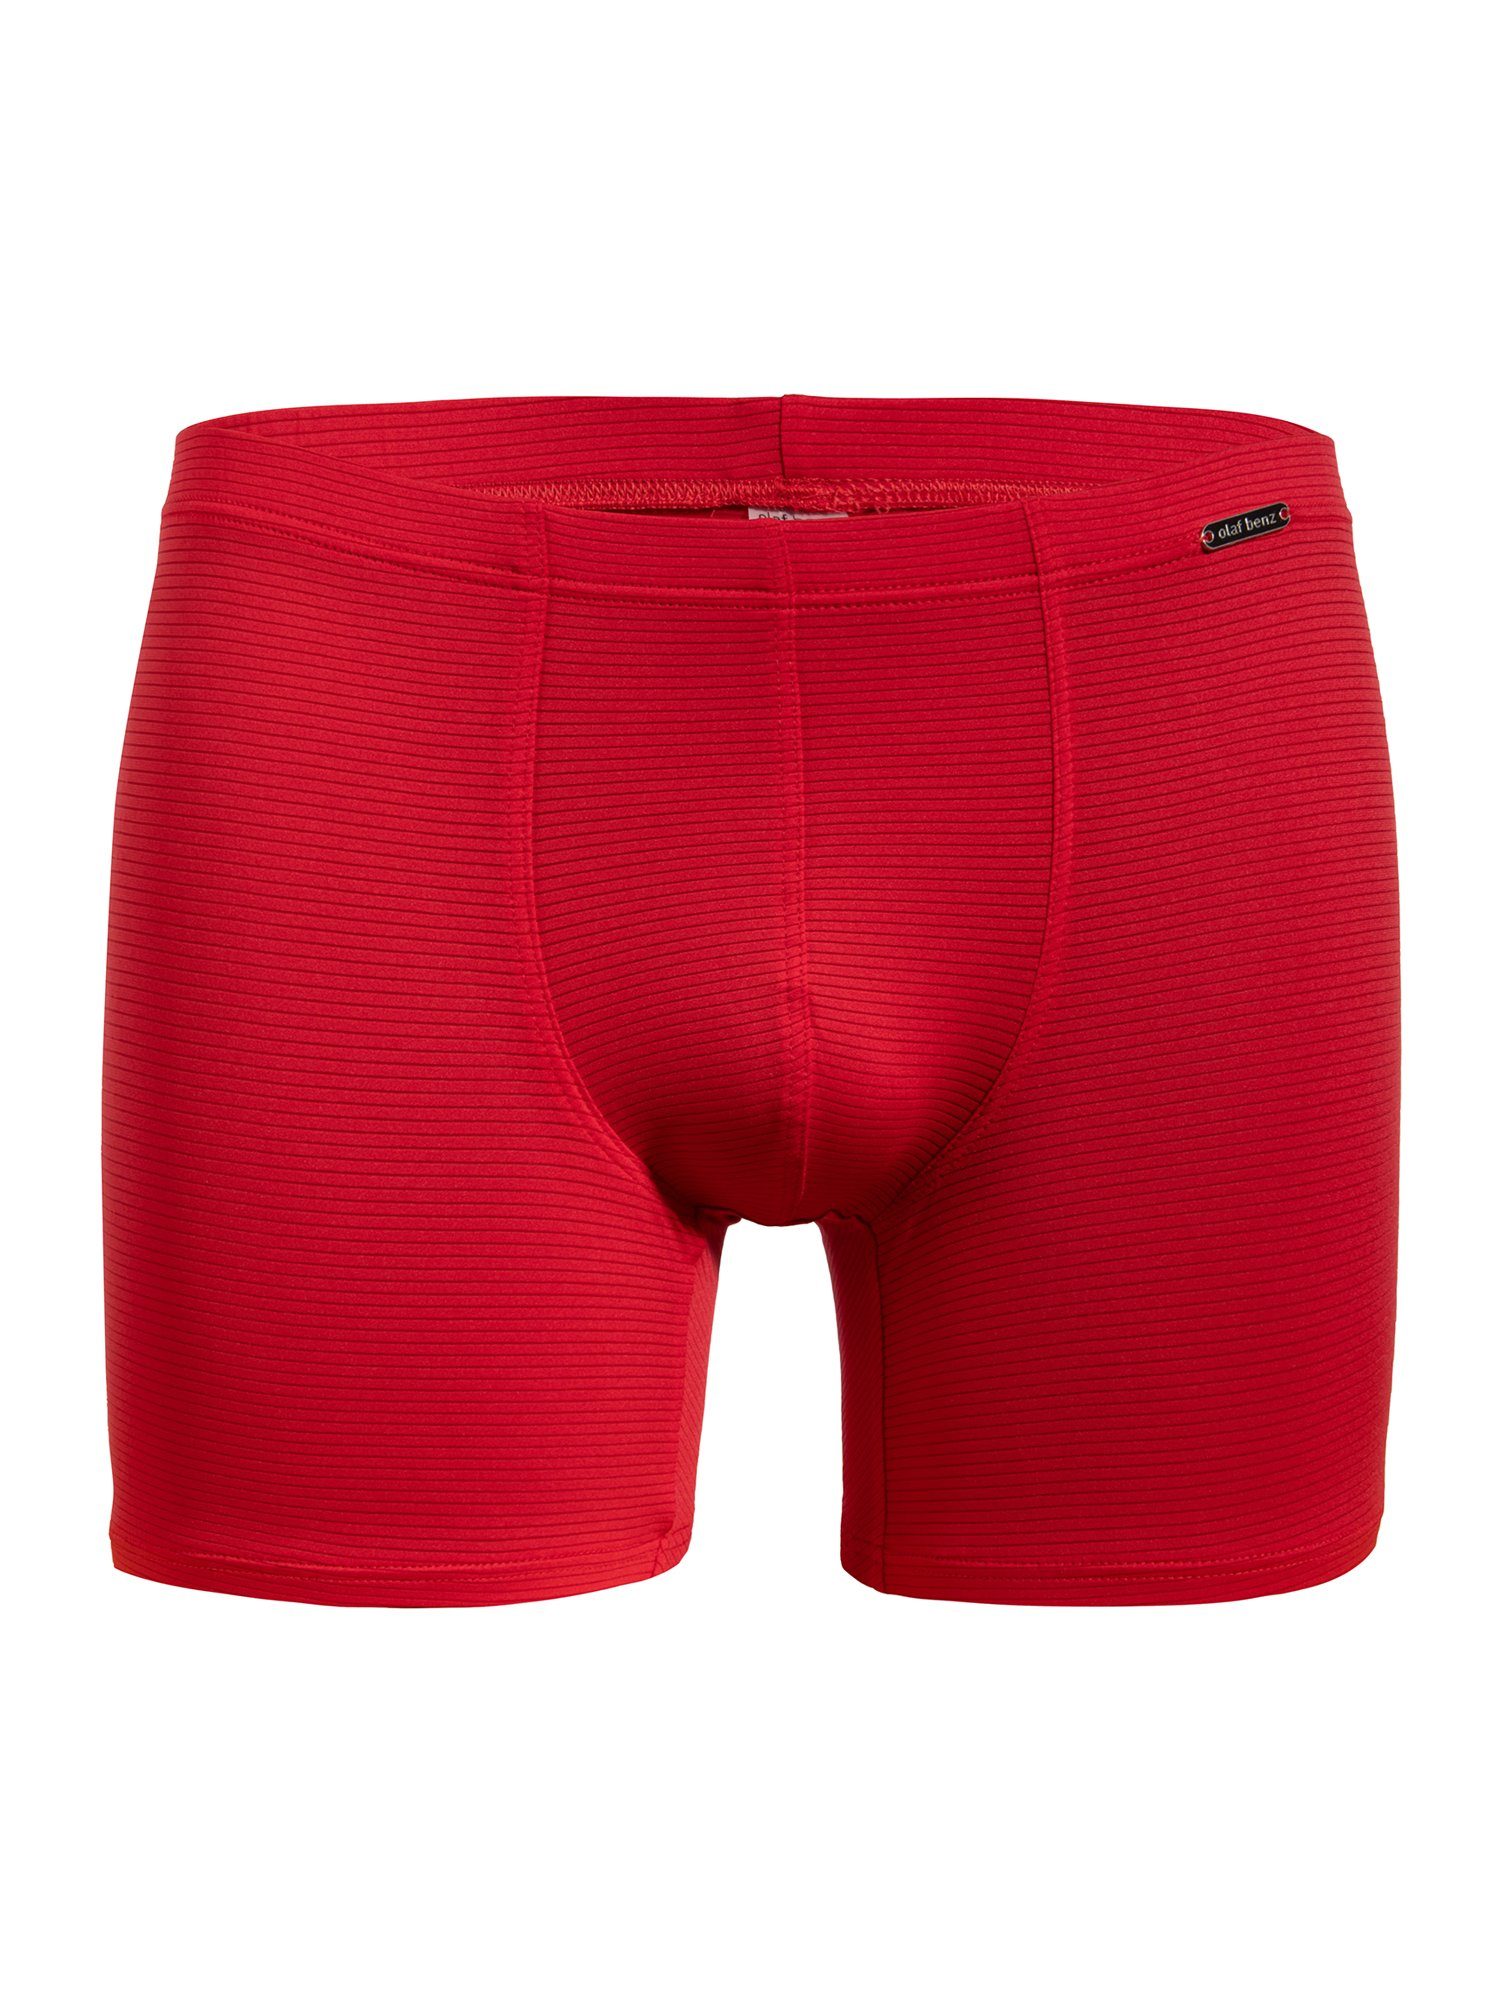 Olaf Benz Retro Boxer RED1201 Boxerpants (1-St)